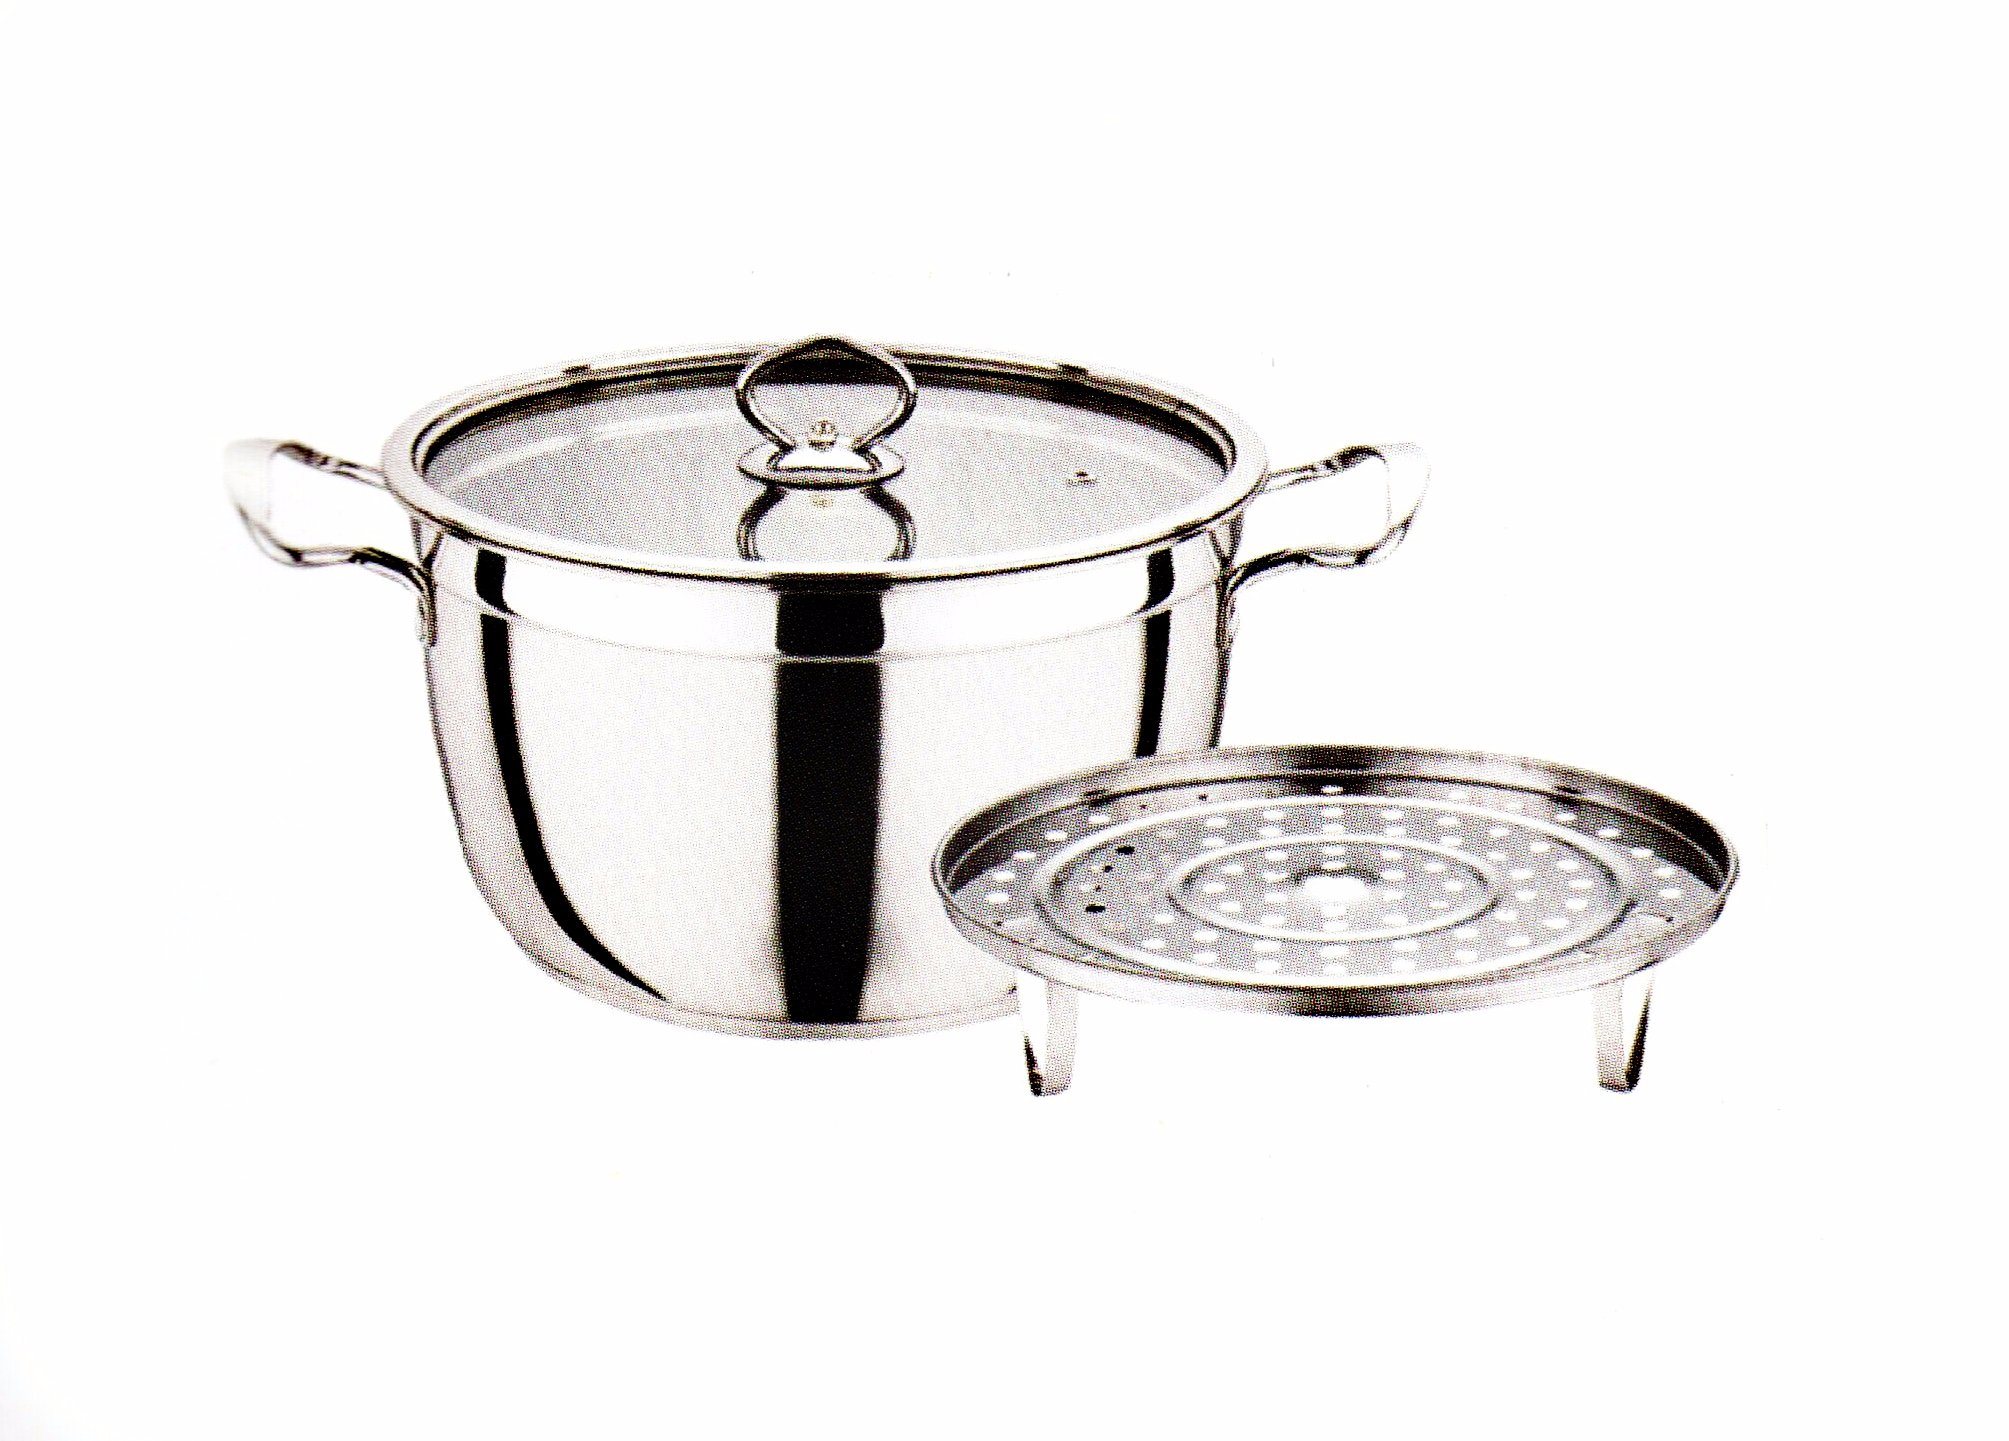 factory Outlets for Dinnerware Dinner Set For 4 People -
 Home Appliance Stainless Steel Cookware Cooking Pot Steaming Pot Cp026 – Long Prosper